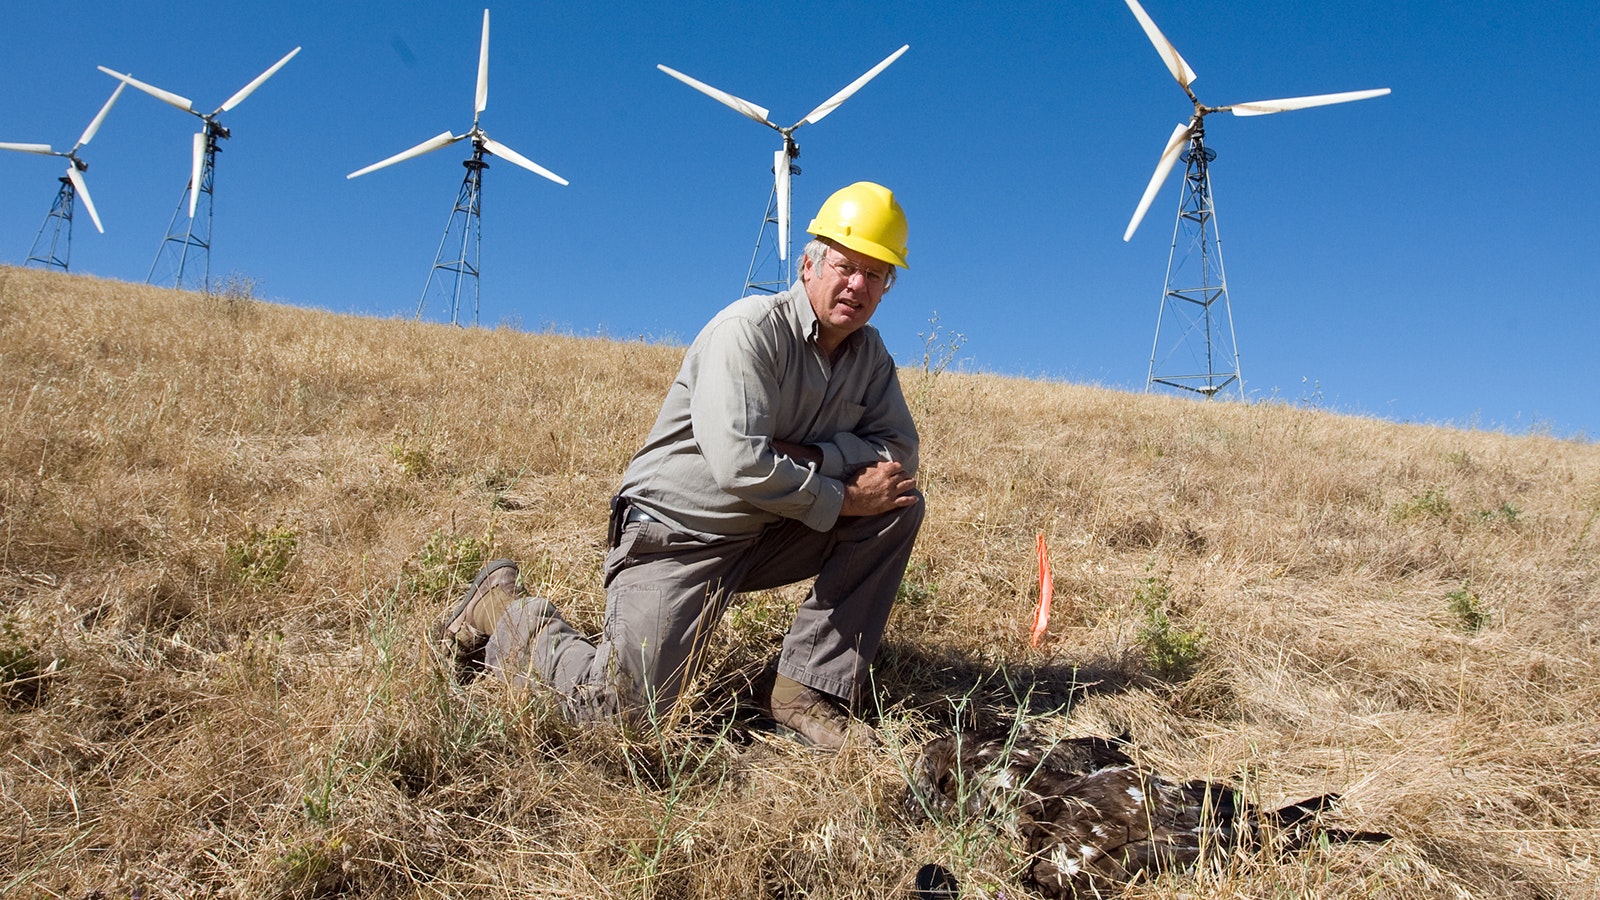 Ecologist Shawn Smallwood standing over a dead eagle carcass in a wind farm in California’s Altamont Pass.